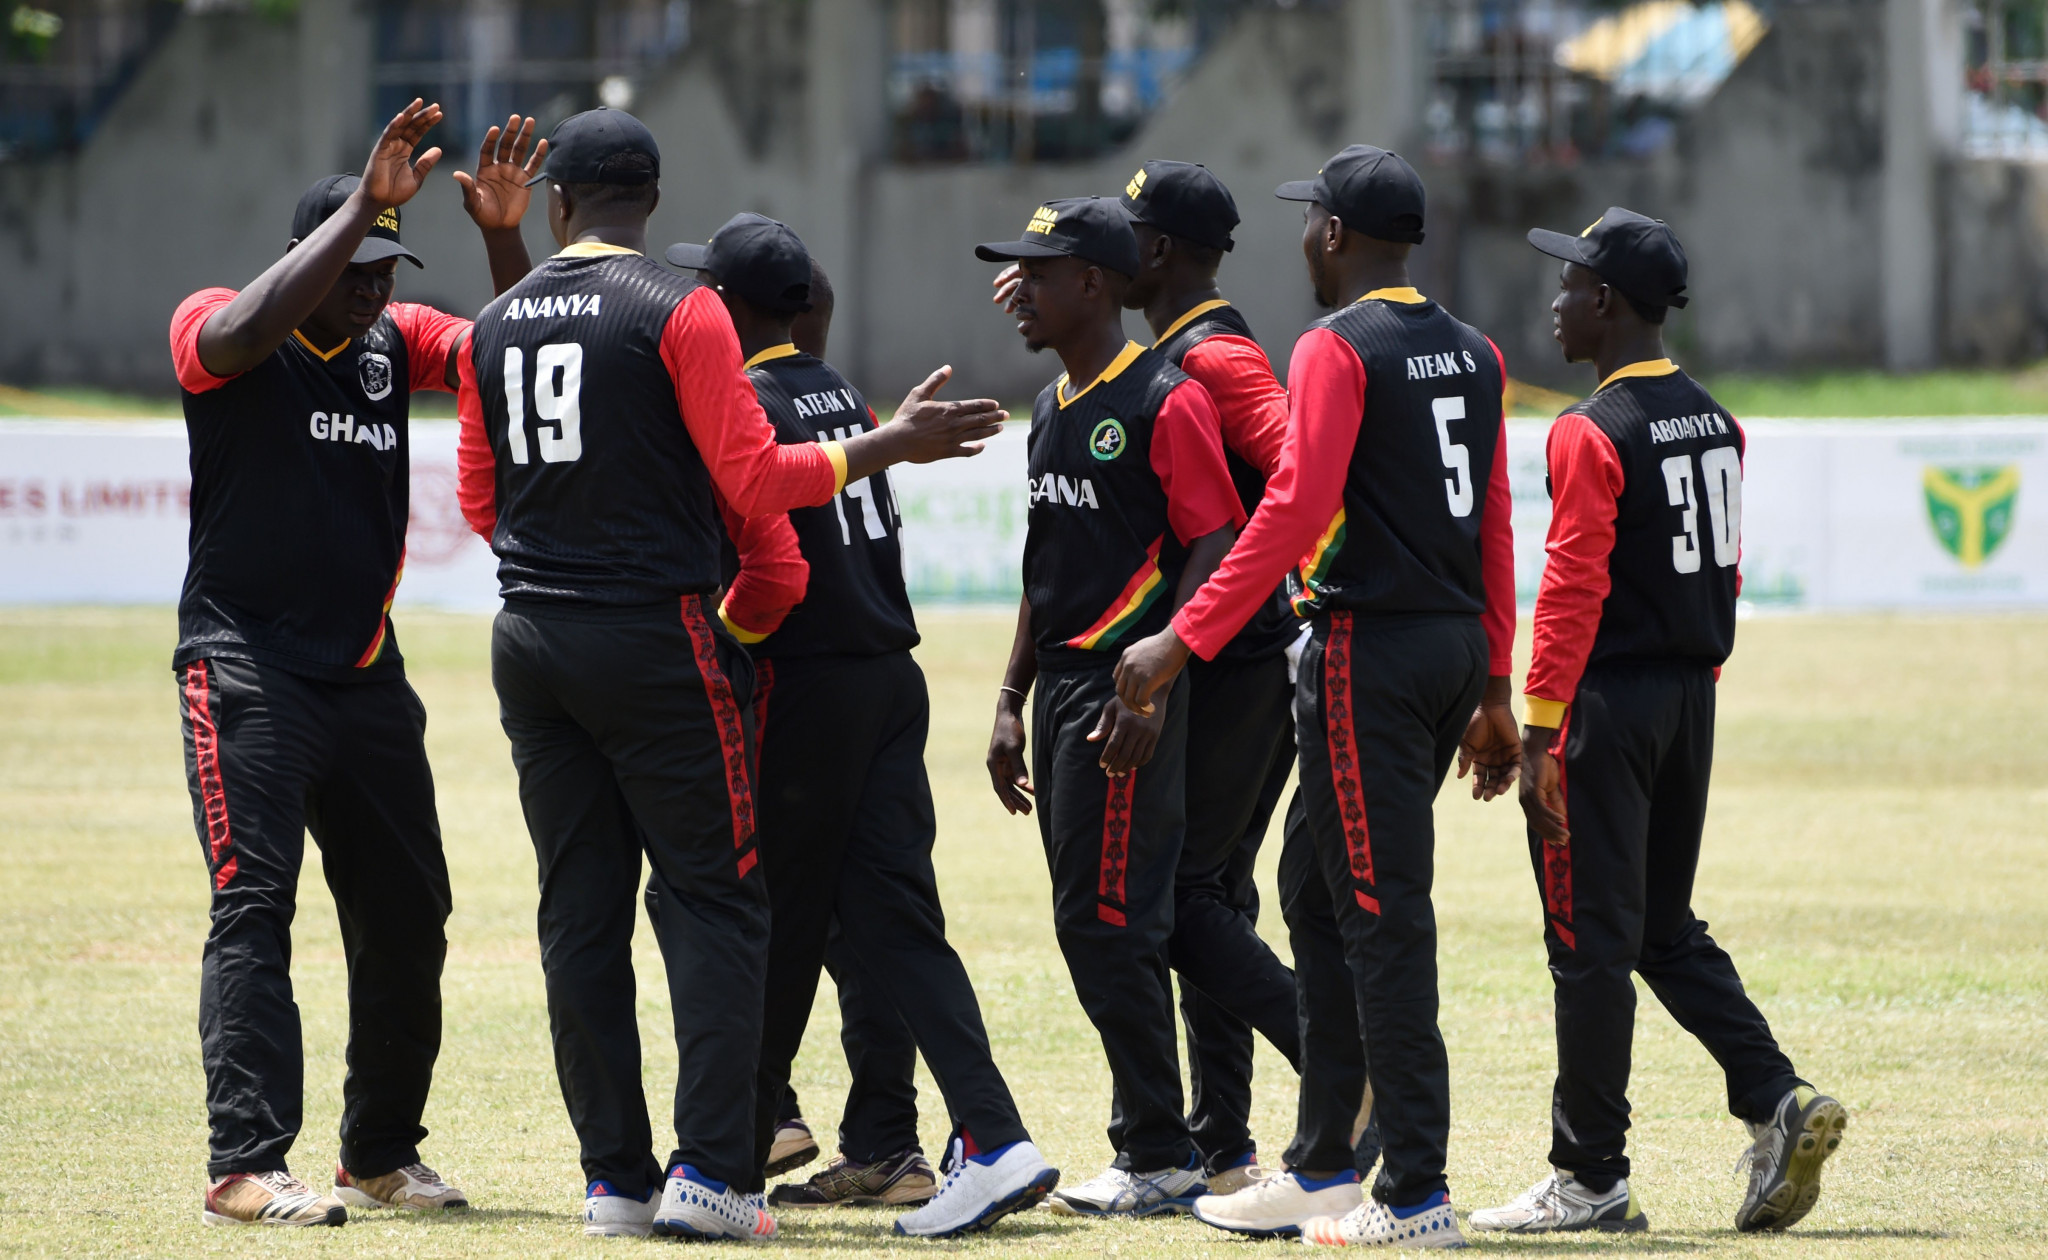 Cricket is set to make its African Games debut in Ghana next year ©Getty Images